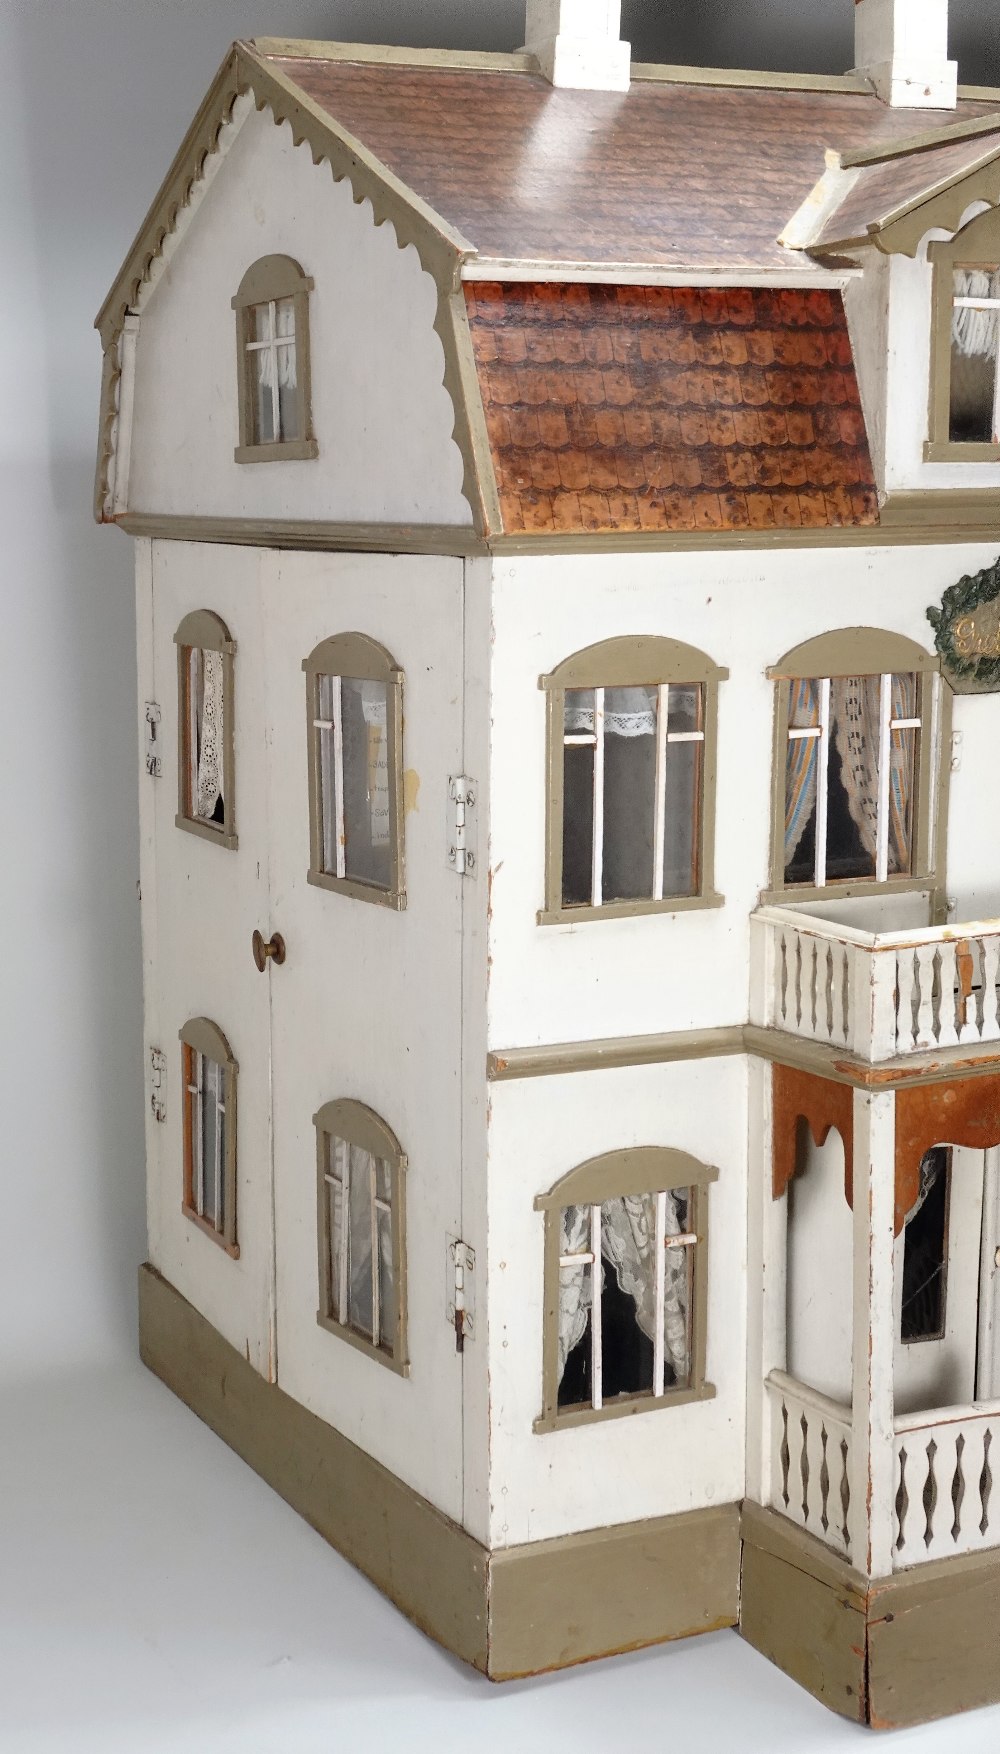 ‘Gretelorg’ an interesting painted wooden dolls house, possibly Christian Hacker, circa 1910, - Image 3 of 7